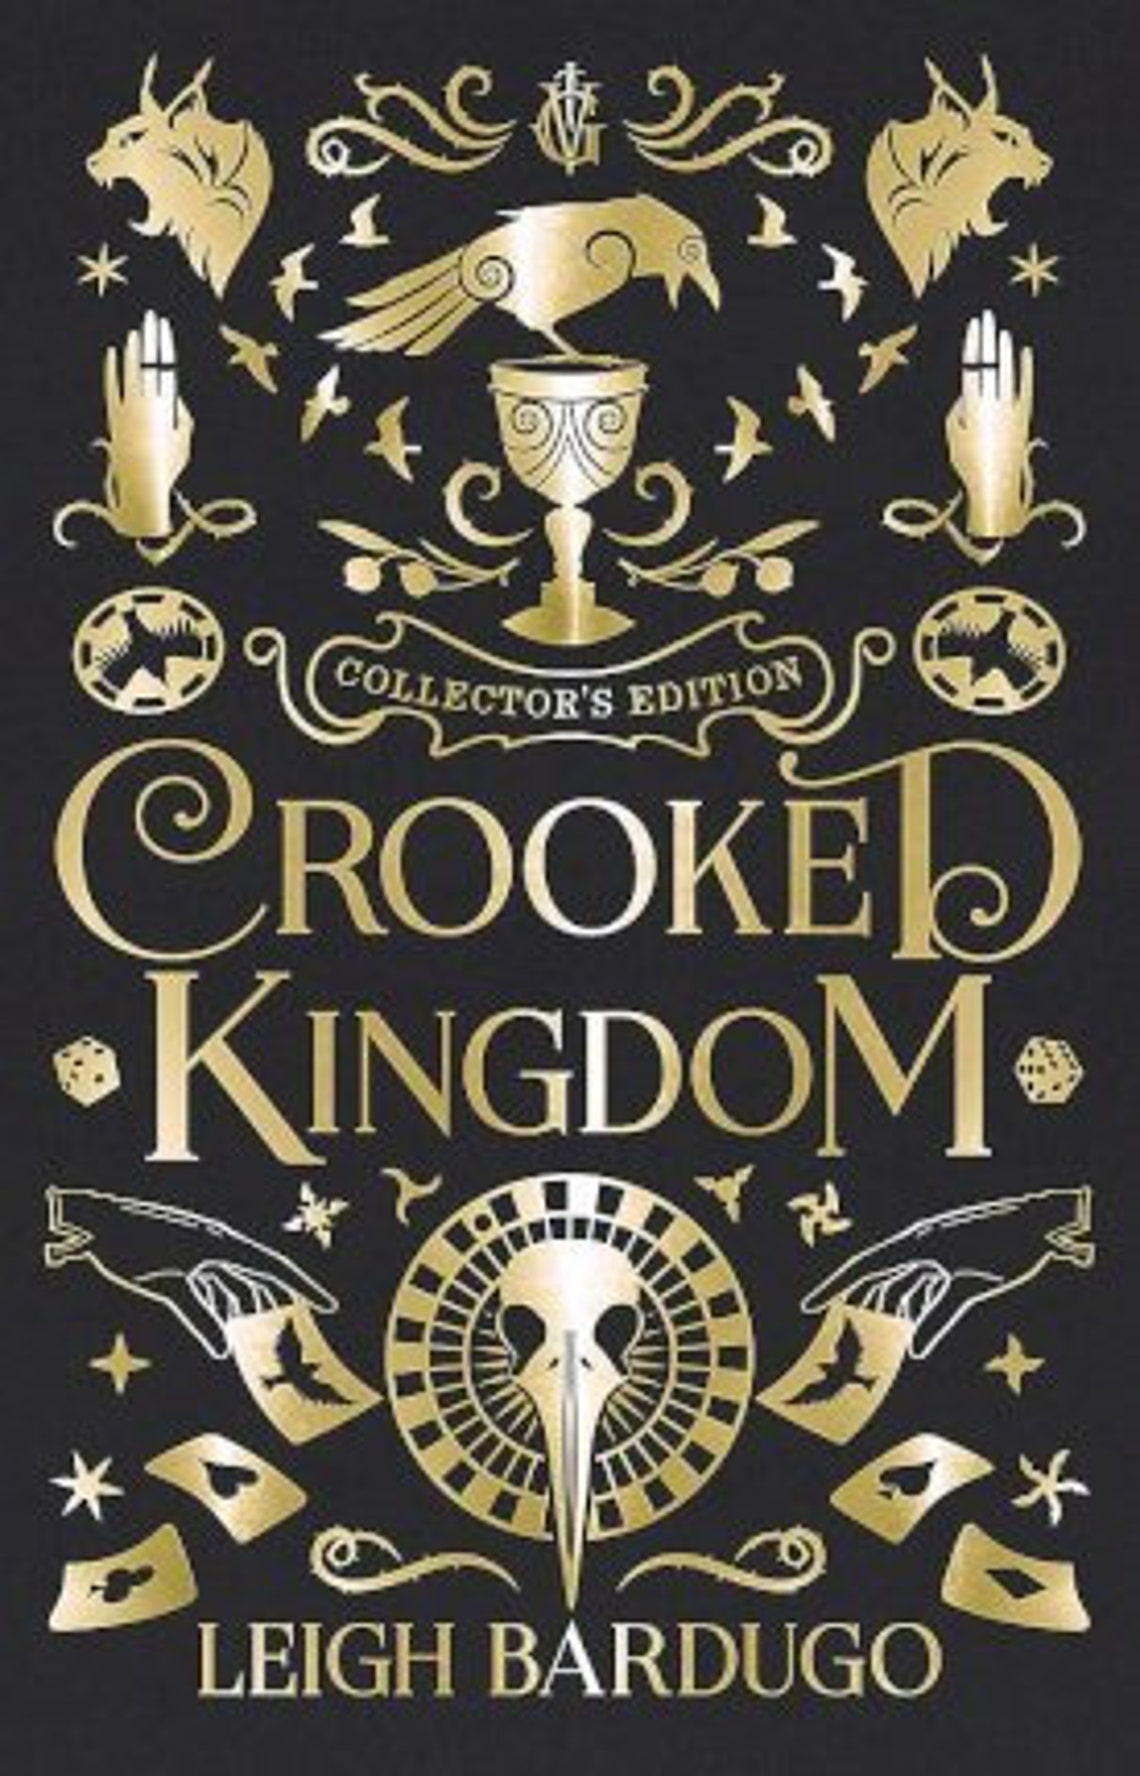 Leigh Bardugo: Crooked Kingdom: Collector's Edition (Hardcover, 2019, Orion Children's Books)